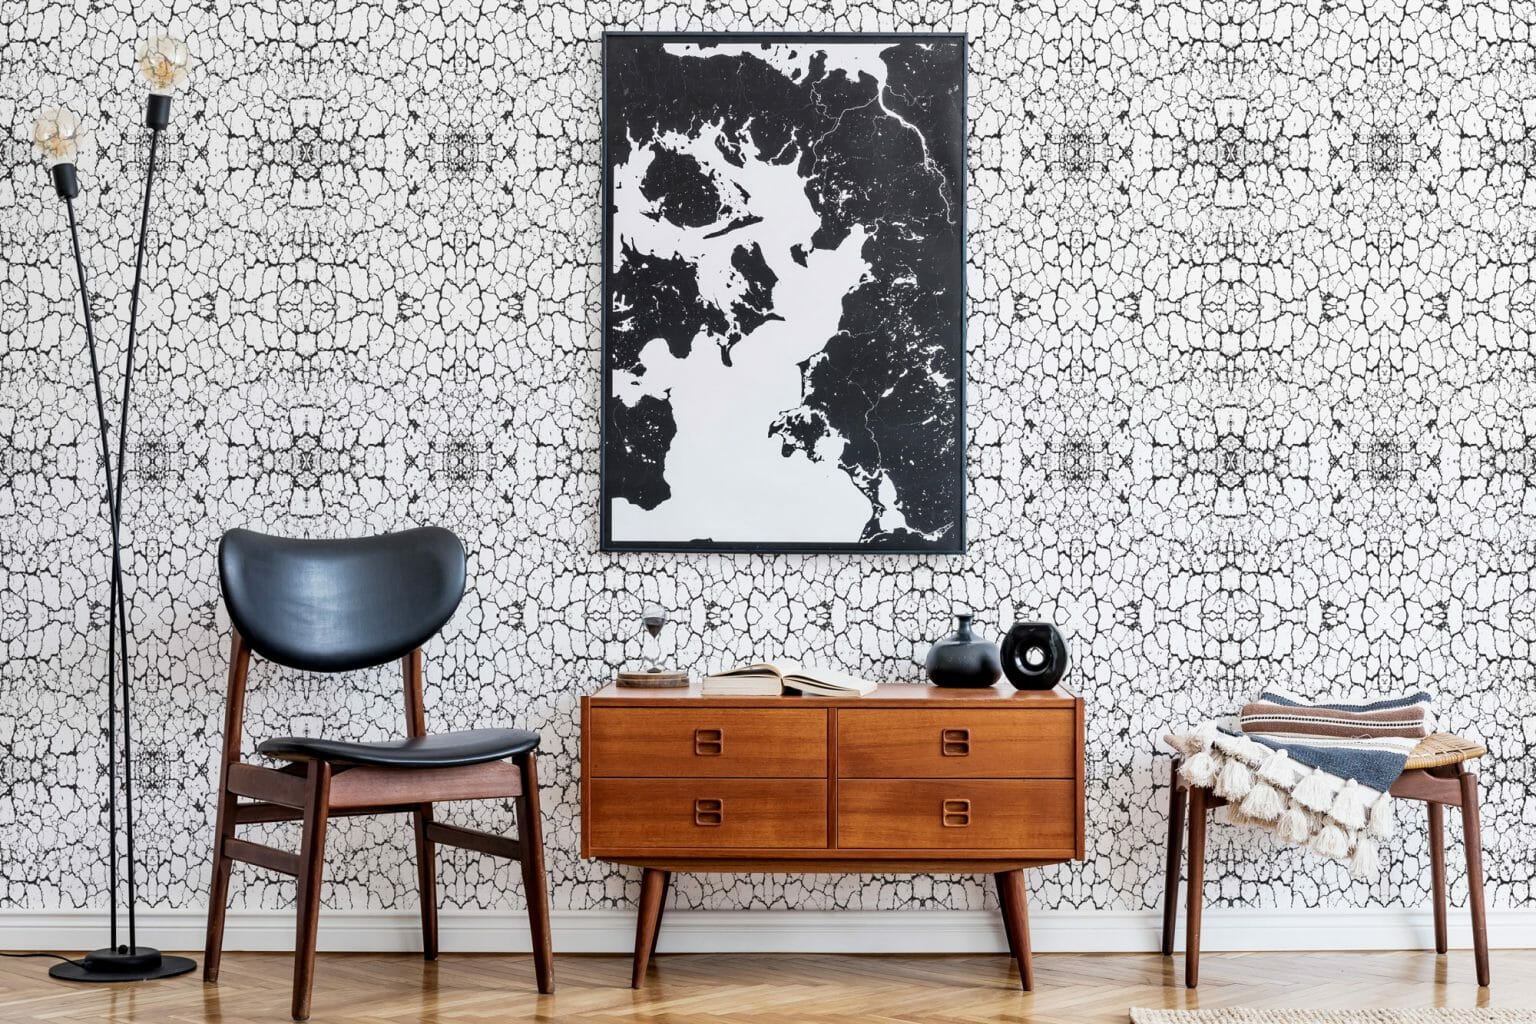 Black and white abstract pattern peel and stick wallpaper - Fancy Walls